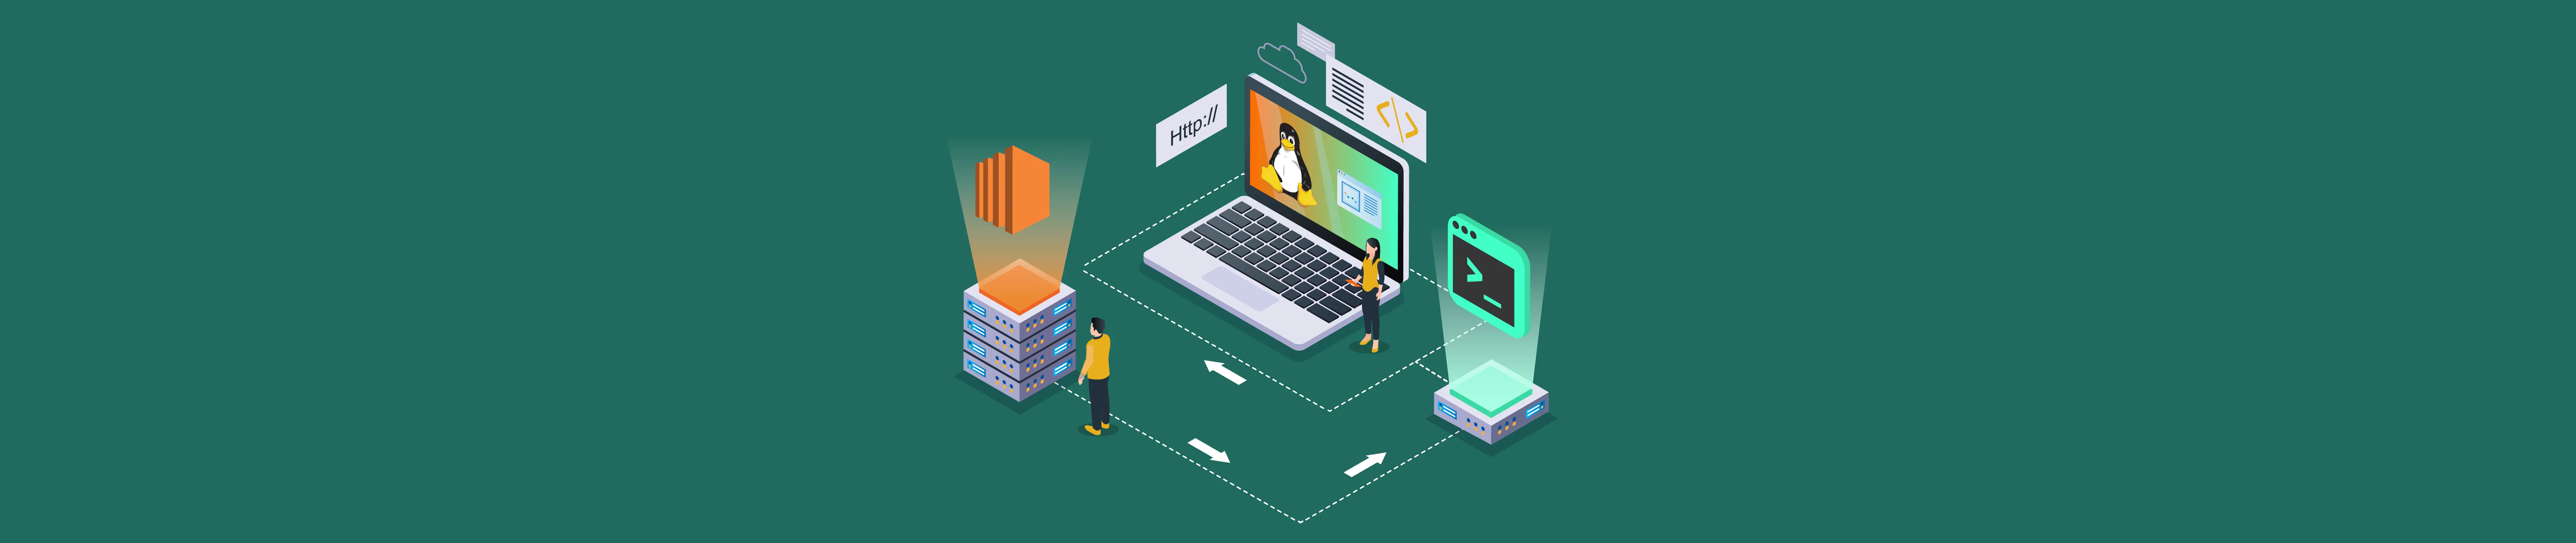 connect to aws ec2 Linux instance using SSH